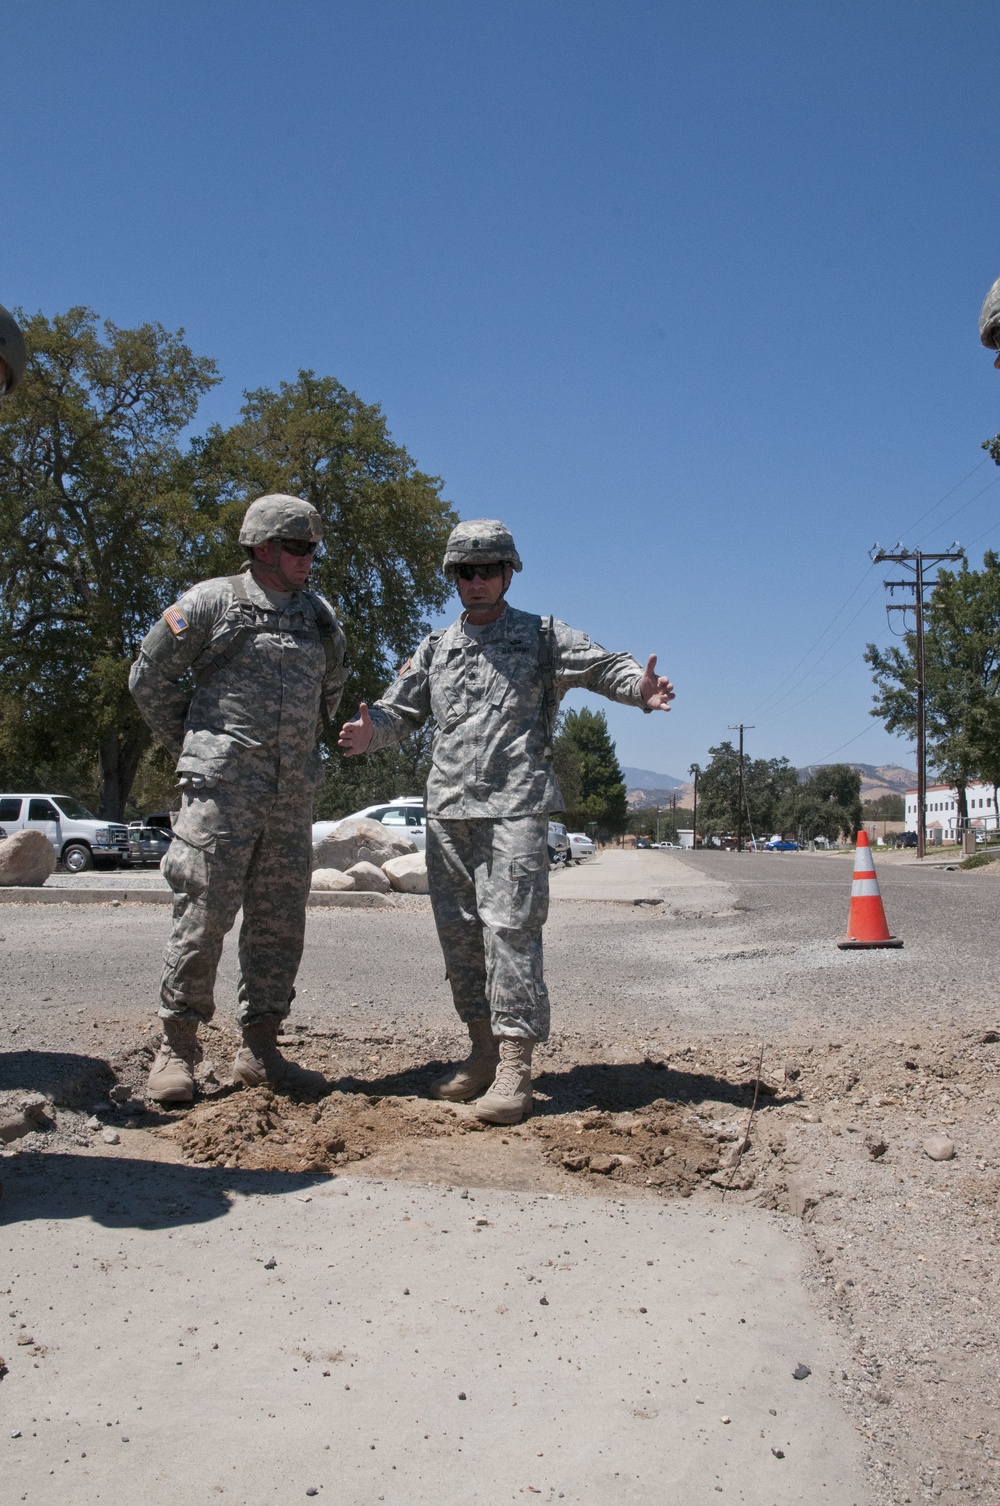 854th Engineer Battalion strives to provide professional products